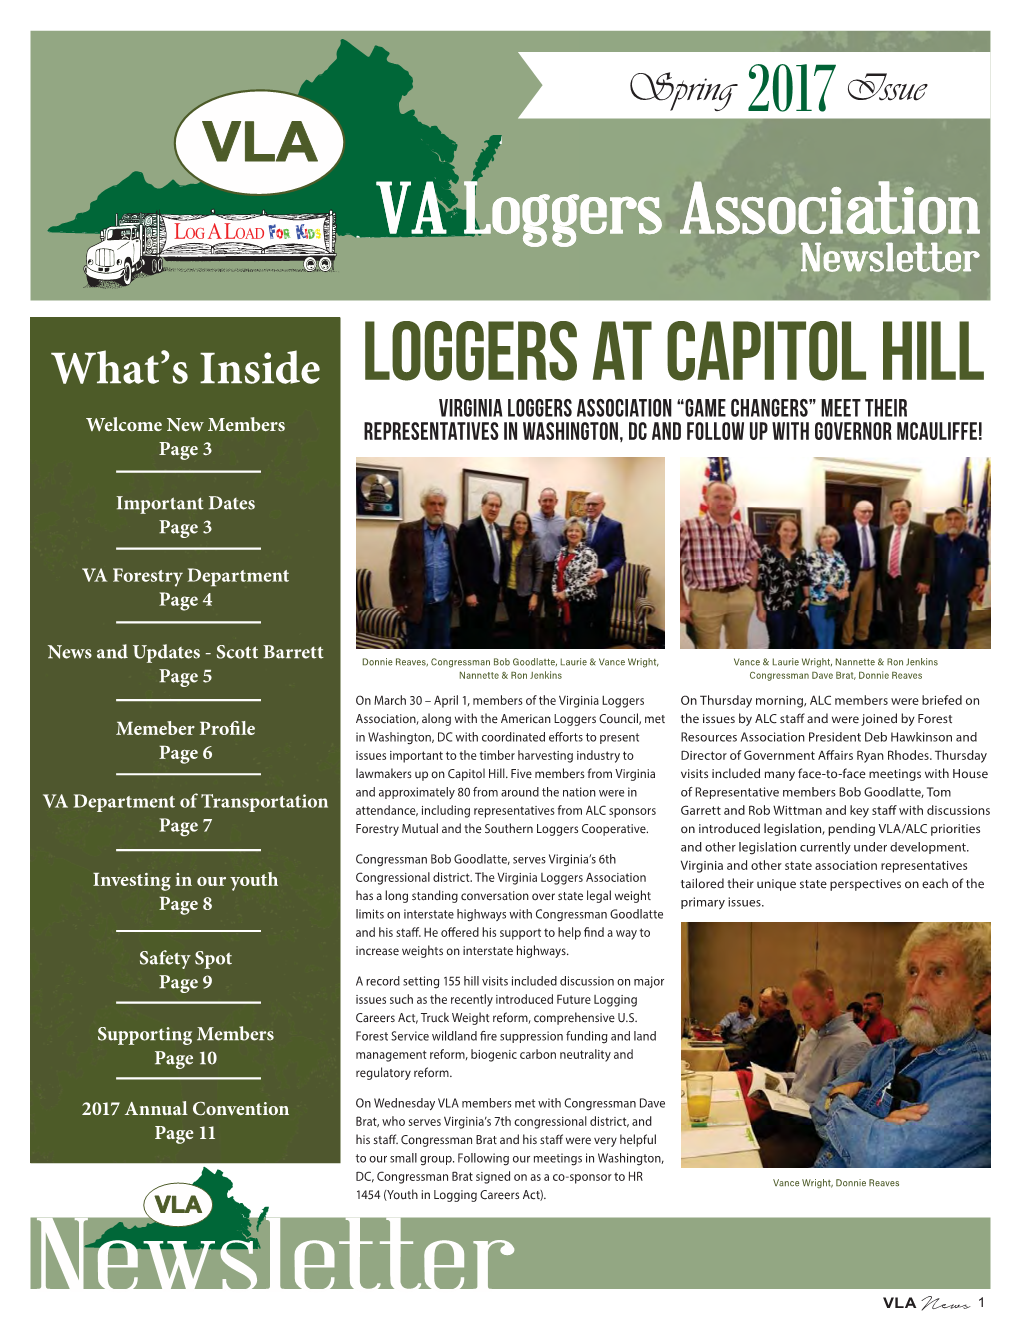 Loggers at Capitol Hill